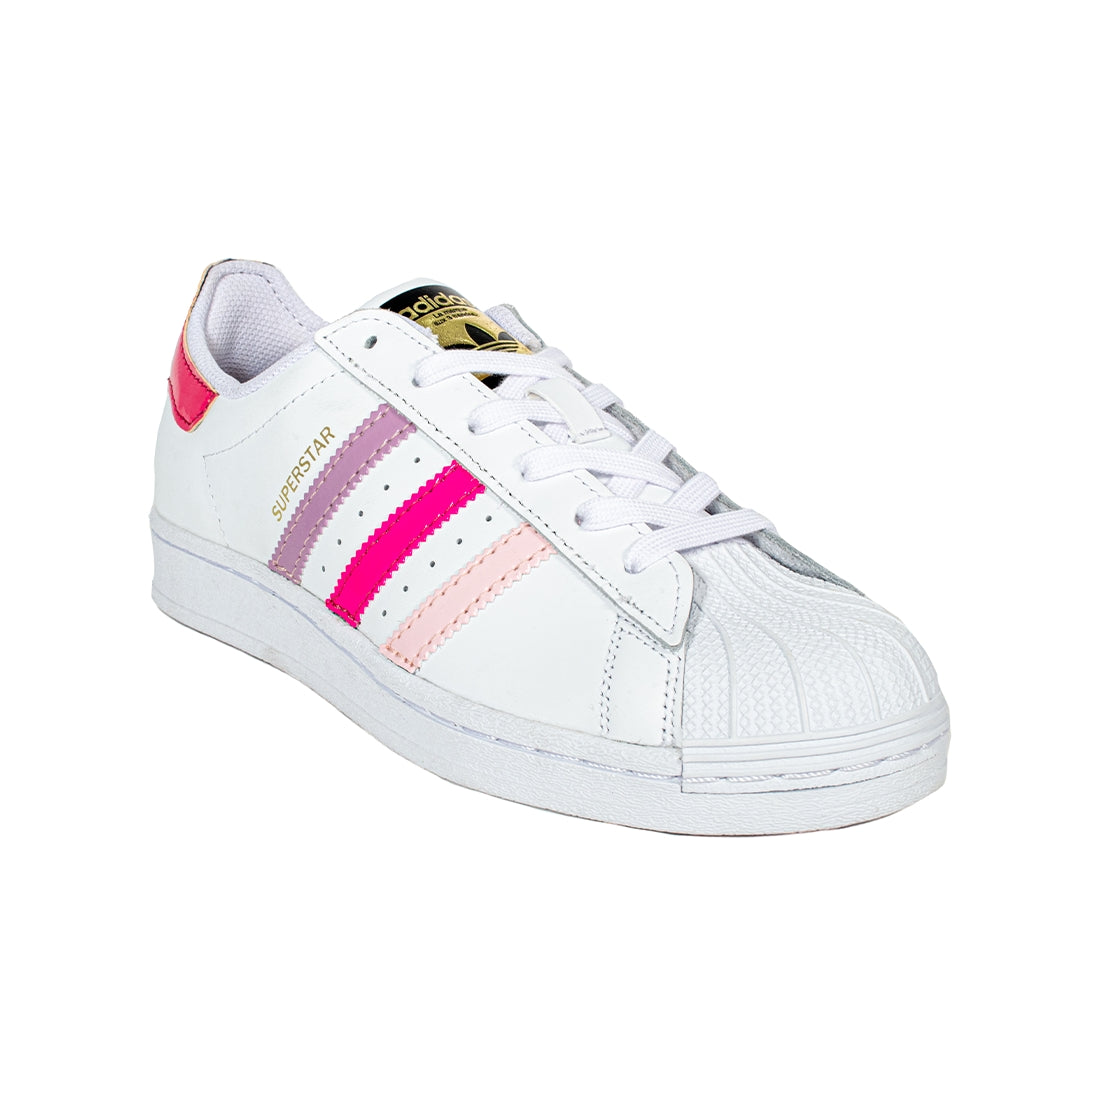 ADIDAS SUPERSTAR PERSONALIZZATE ADE